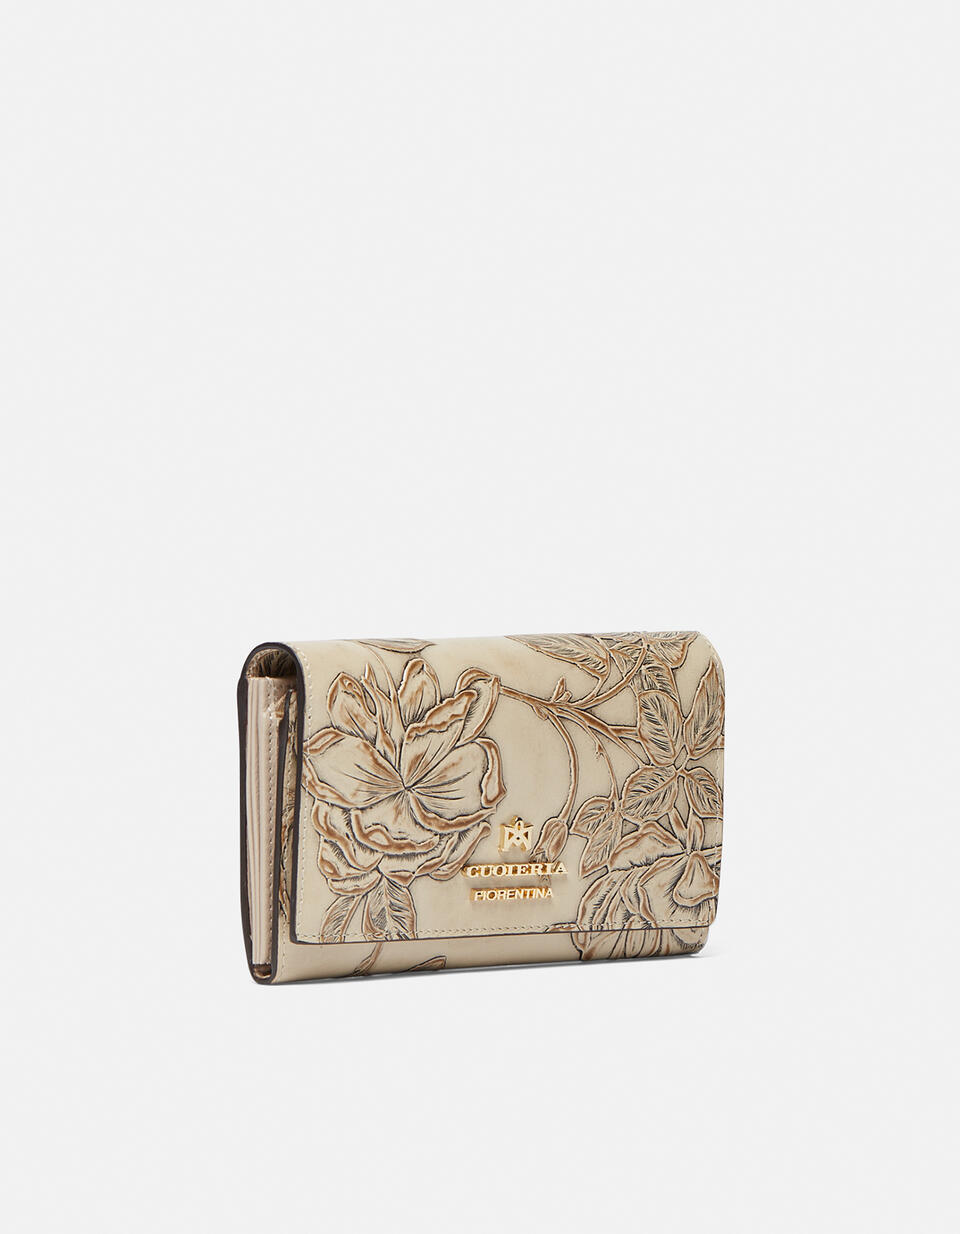 Accordian style wallet TAUPE  - Women's Wallets - Women's Wallets - Wallets - Cuoieria Fiorentina